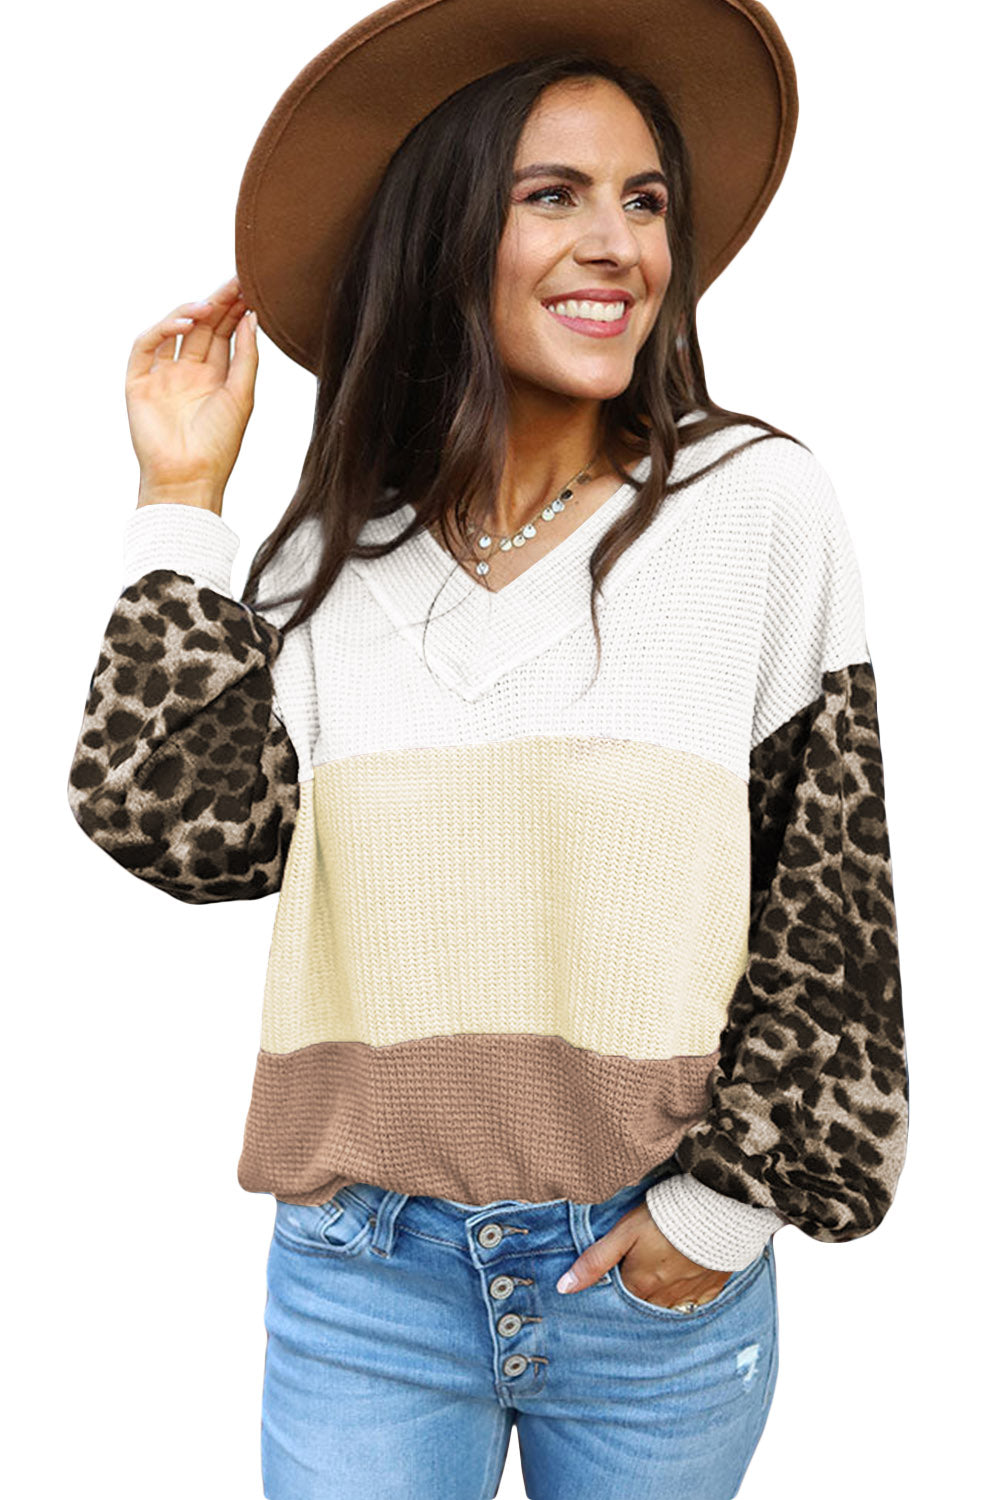 Apricot Wild Leopard Contrast Sleeve Colorblock Waffle Knit Top Long Sleeve Tops JT's Designer Fashion